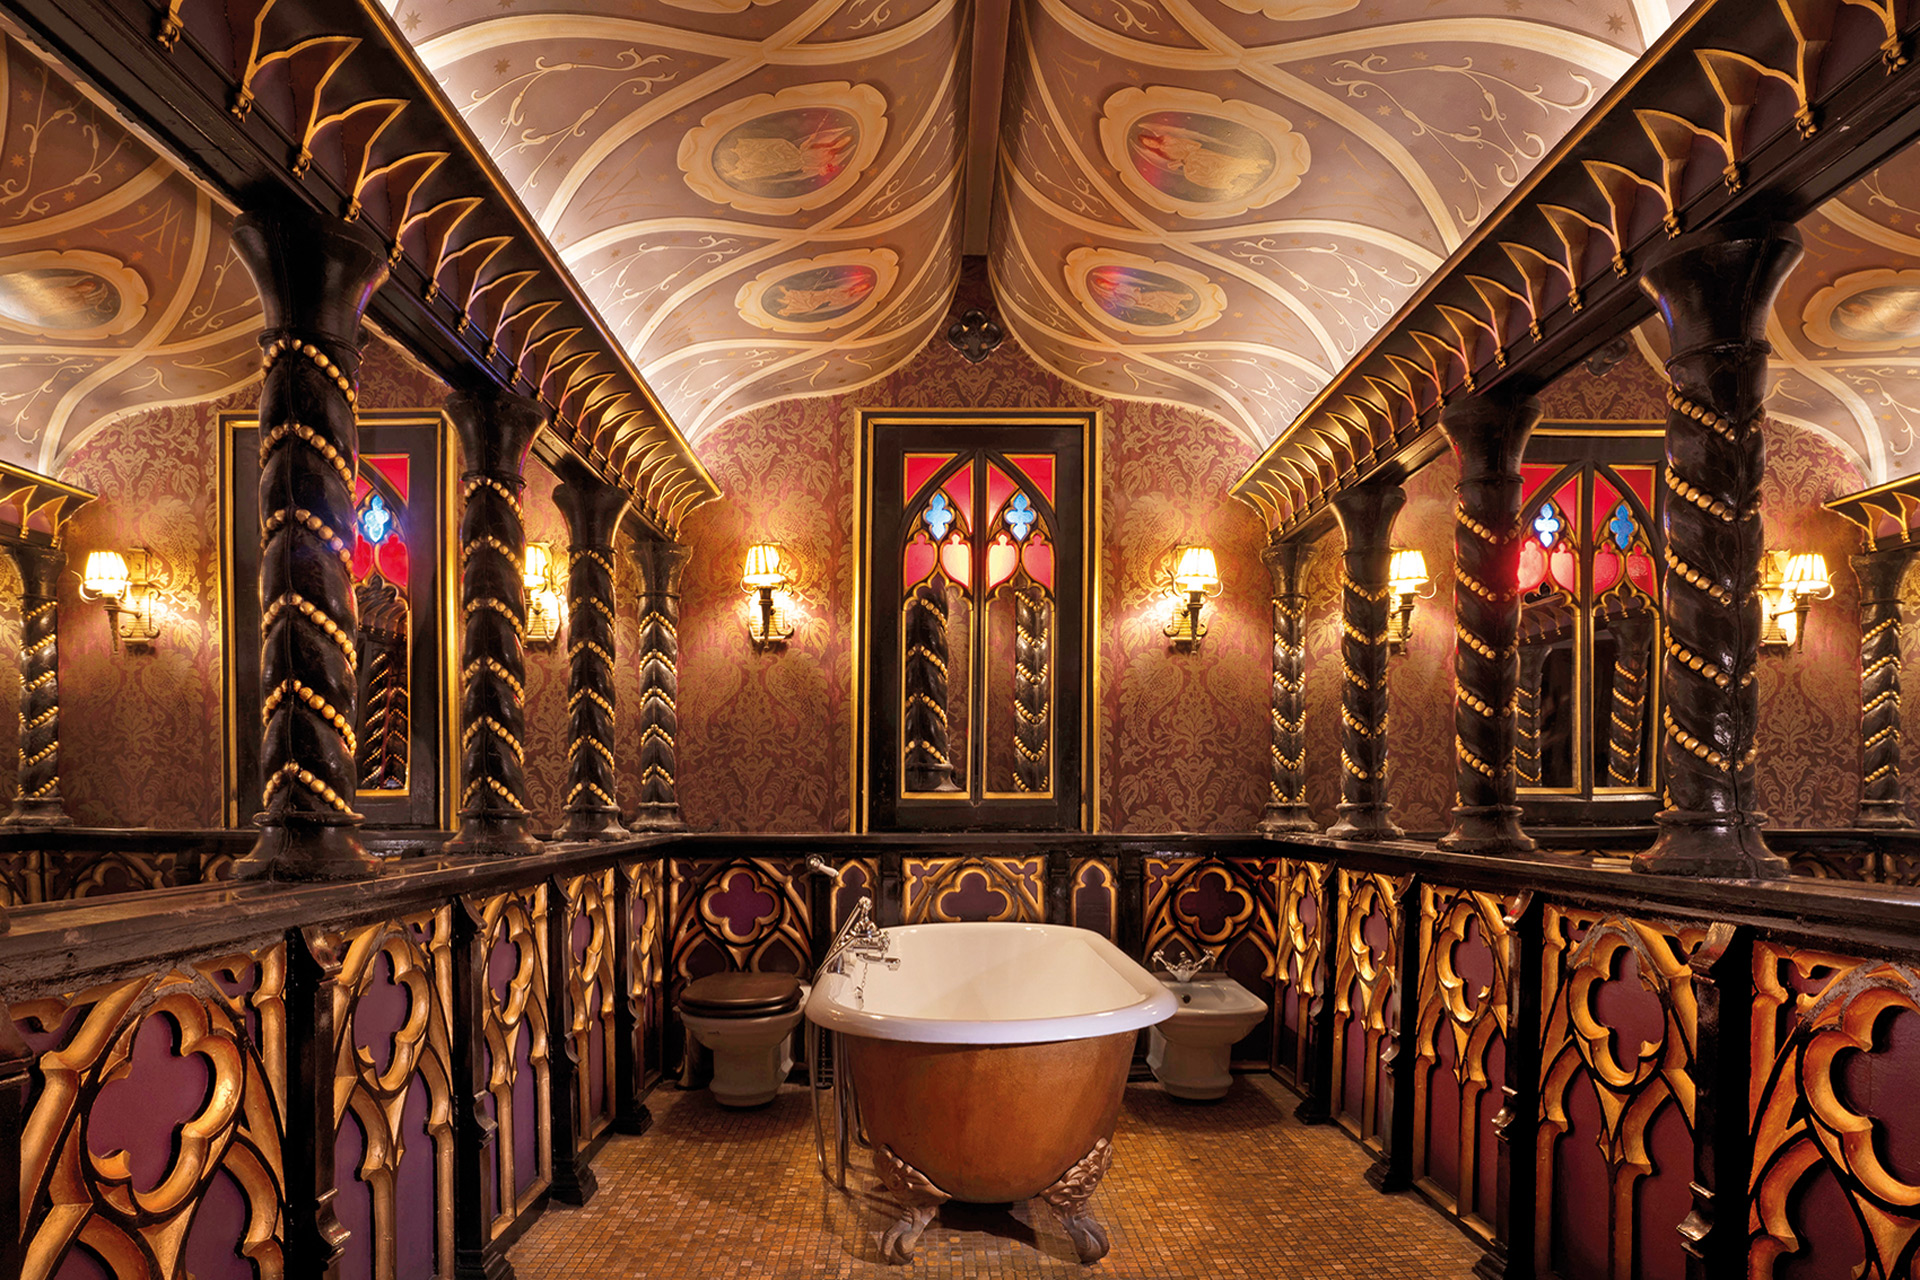 Bathroom at The Witchery hotel.